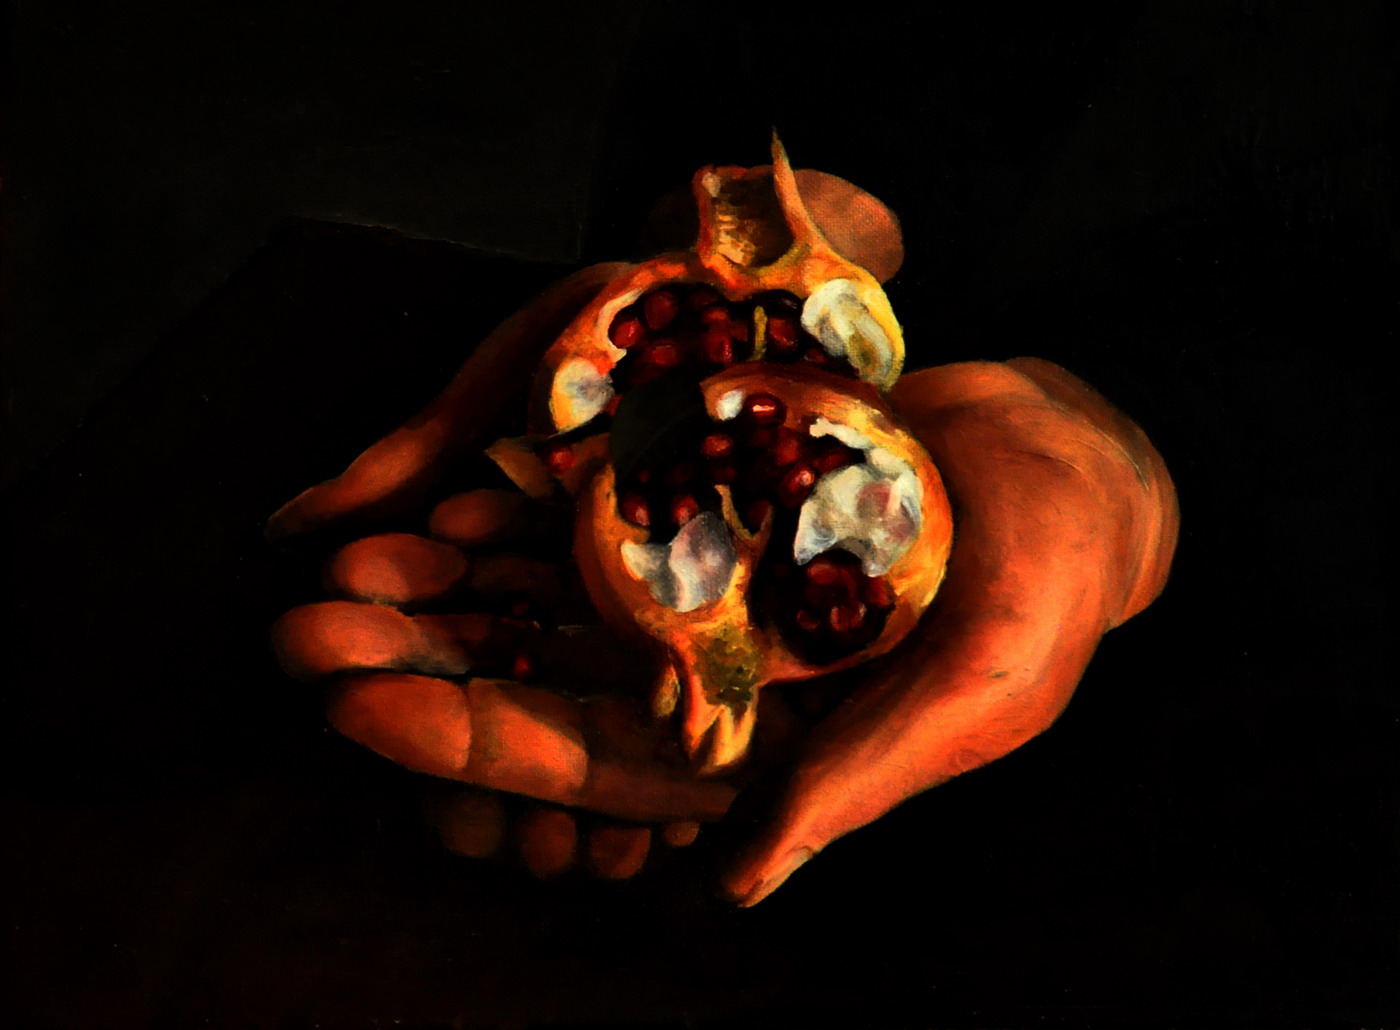 Hands (40x50cm) oil on canvas